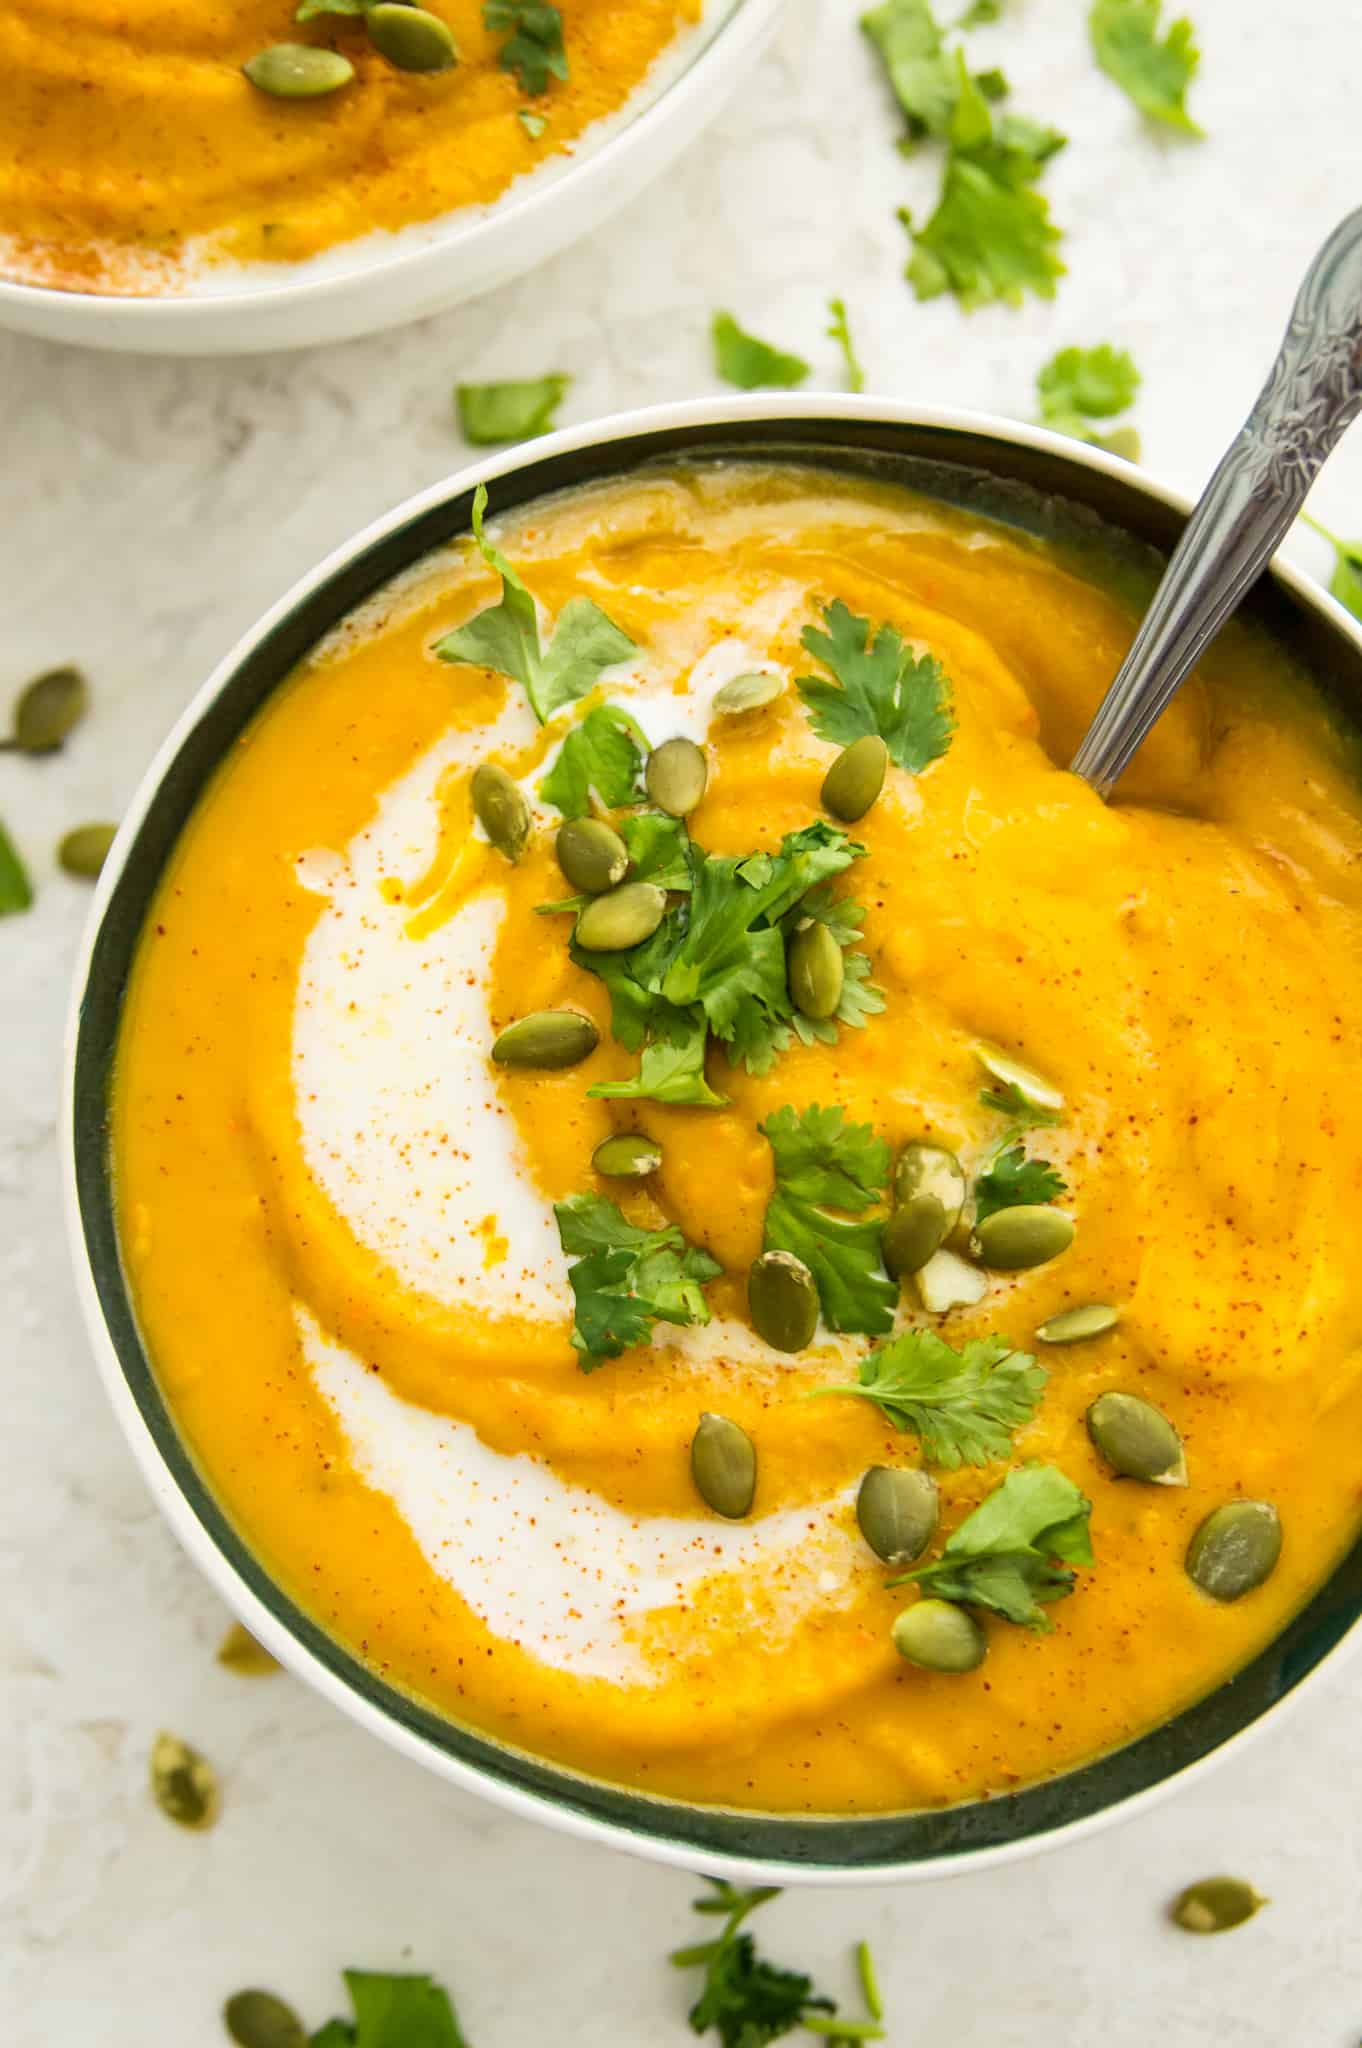 A bowl of pureed Paleo pumpkin and sweet potato soup garnished with pumpkin seeds and herbs.